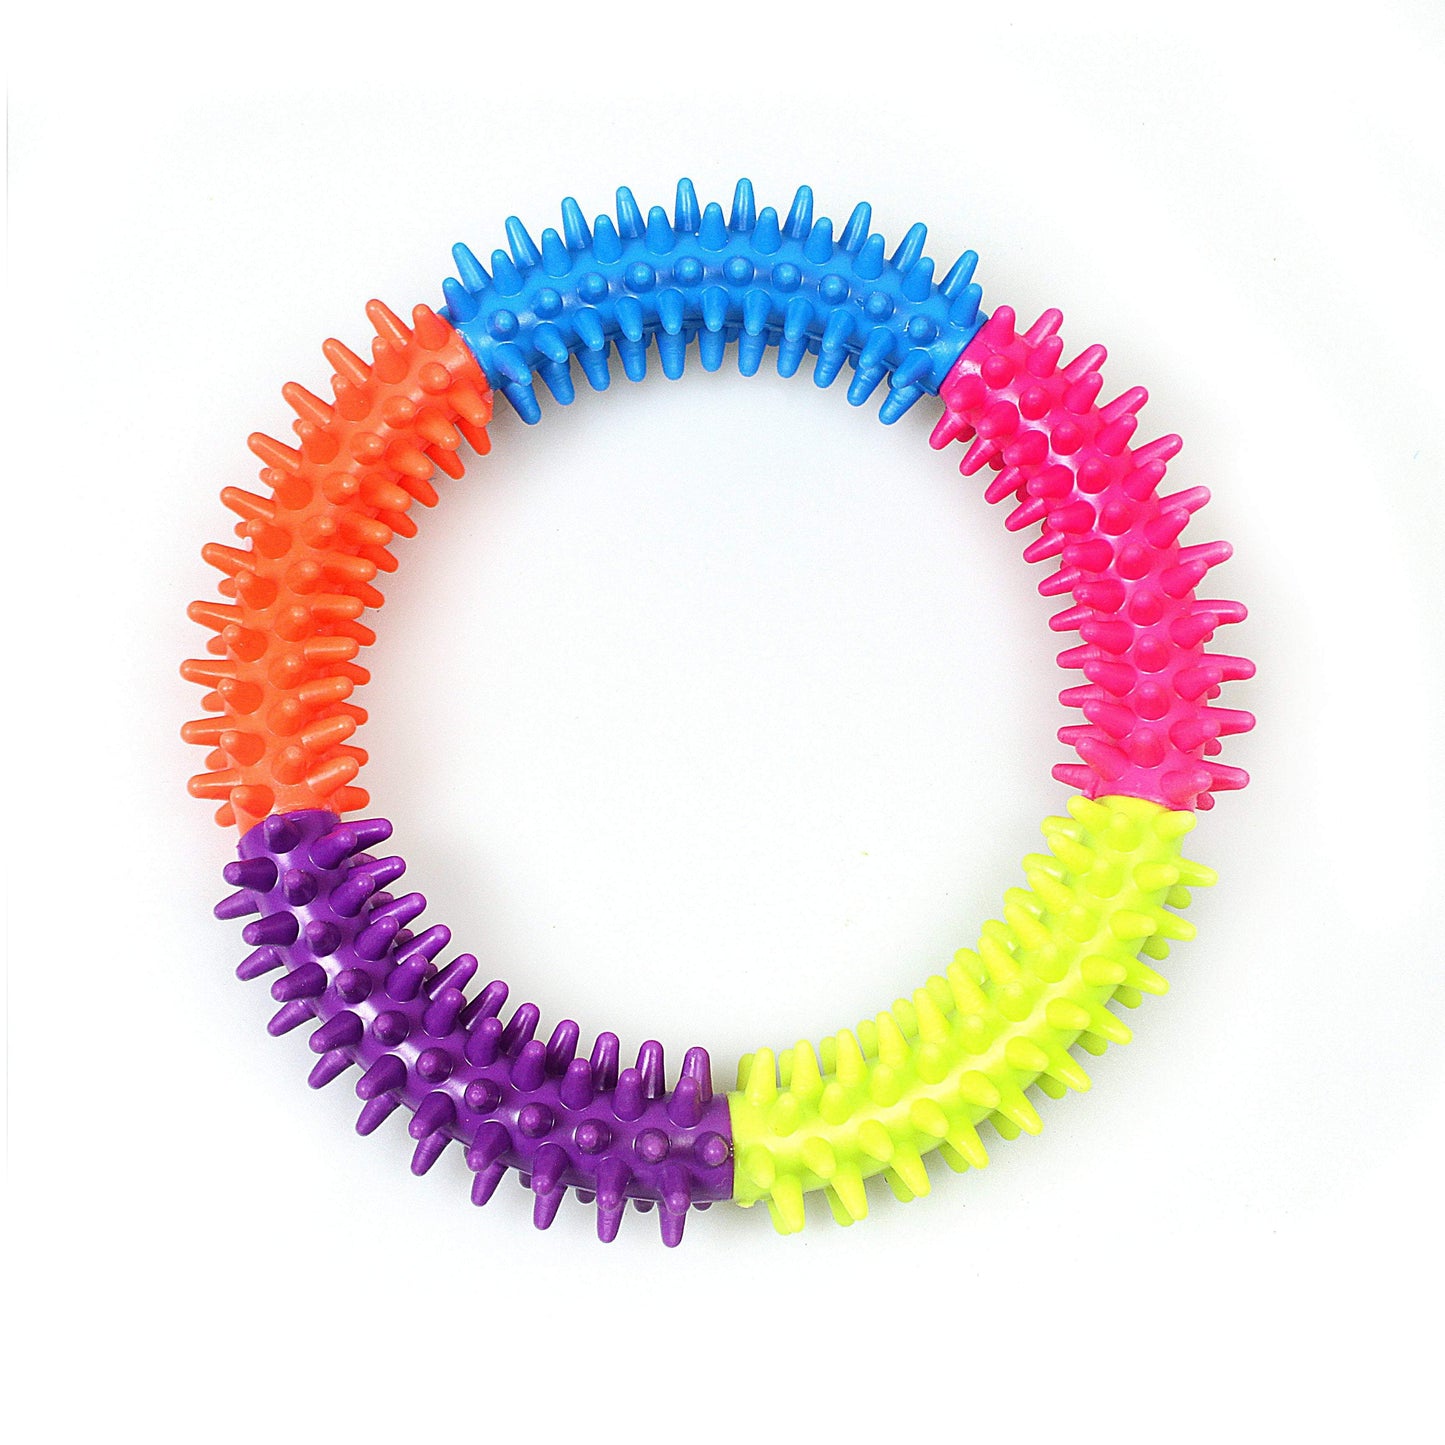 Soft Rubber Dental Dog Ring Toy Puppy Teeth Cleaning Multi Ring 13 cm 4615 A (Parcel Rate)